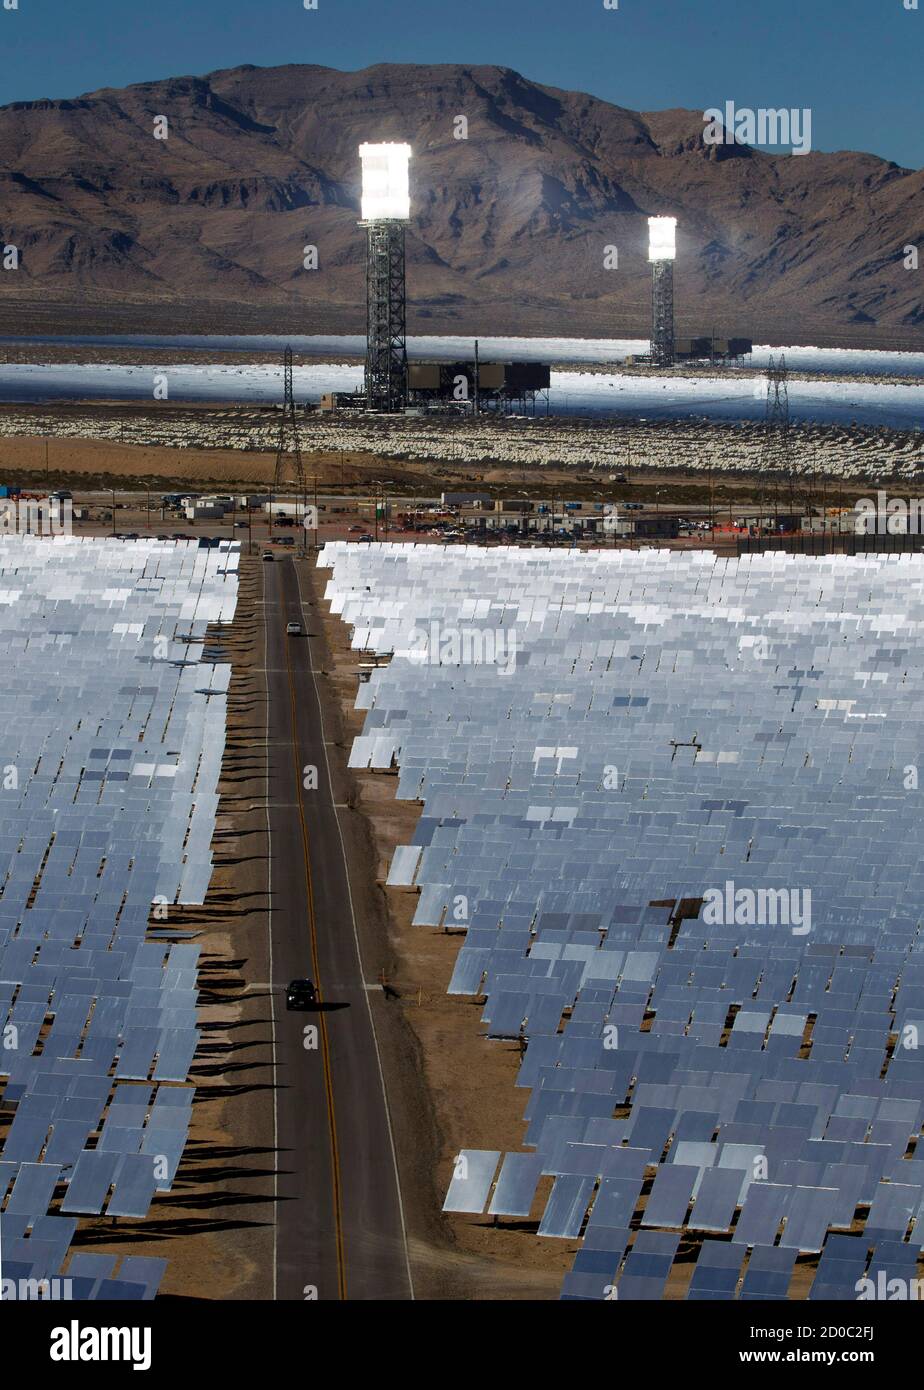 Heliostats reflect sunlight onto boilers in towers during the grand opening of the Ivanpah Solar Electric Generating System in the Mojave Desert near the California-Nevada border February 13, 2014. The project, a partnership of NRG, BrightSource, Google and Bechtel, is the world's largest solar thermal facility and uses 347,000 sun-facing mirrors to produce 392 Megawatts of electricity, enough energy to power more than 140,000 homes. REUTERS/Steve Marcus (UNITED STATES - Tags: ENERGY SCIENCE TECHNOLOGY BUSINESS) Stock Photo